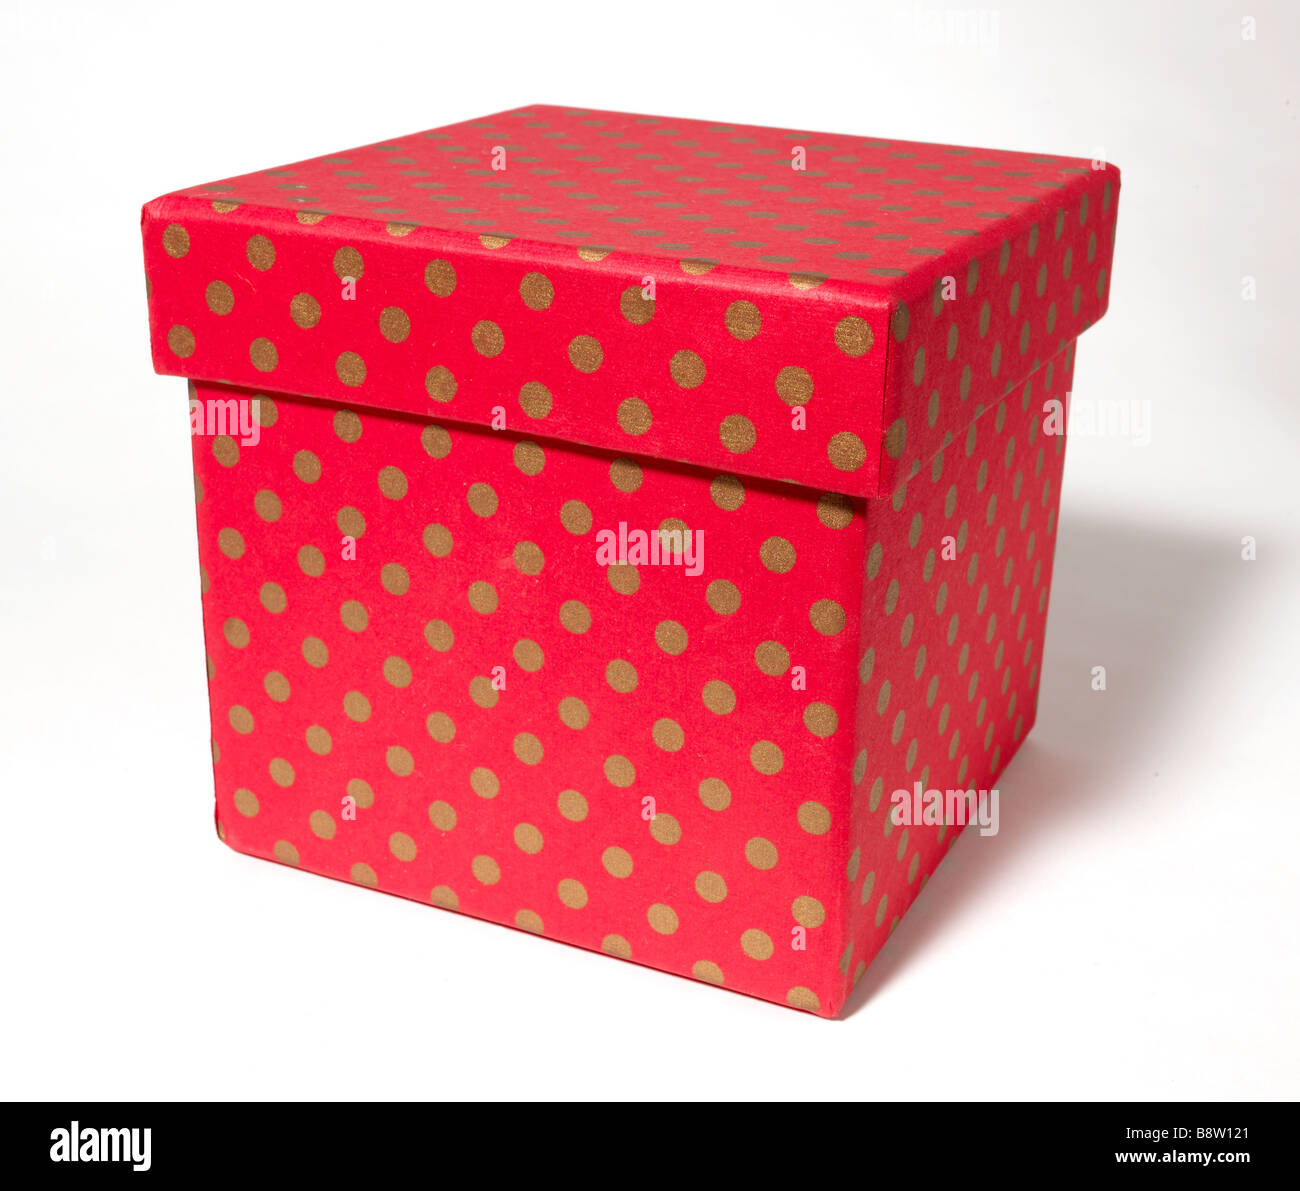 Red and Gold Polka Dot Gift Box Present Stock Photo